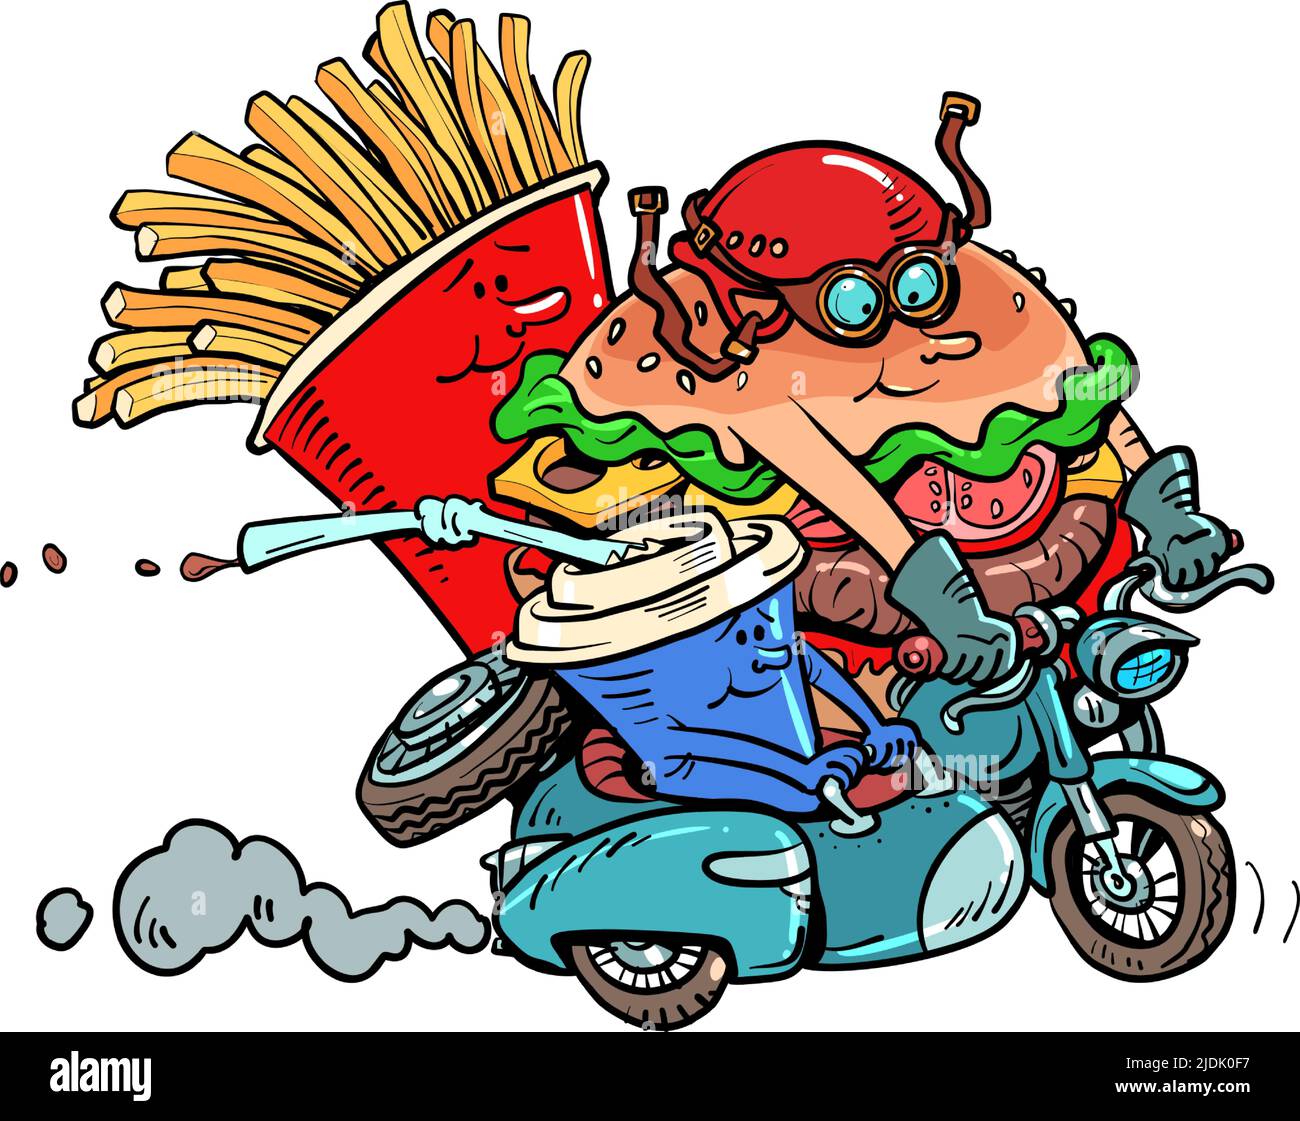 Fast food products characters bikers ride a motorcycle. Road restaurant. Burger fries drink cola. Comic cartoon style kitsch vintage hand drawn illust Stock Vector